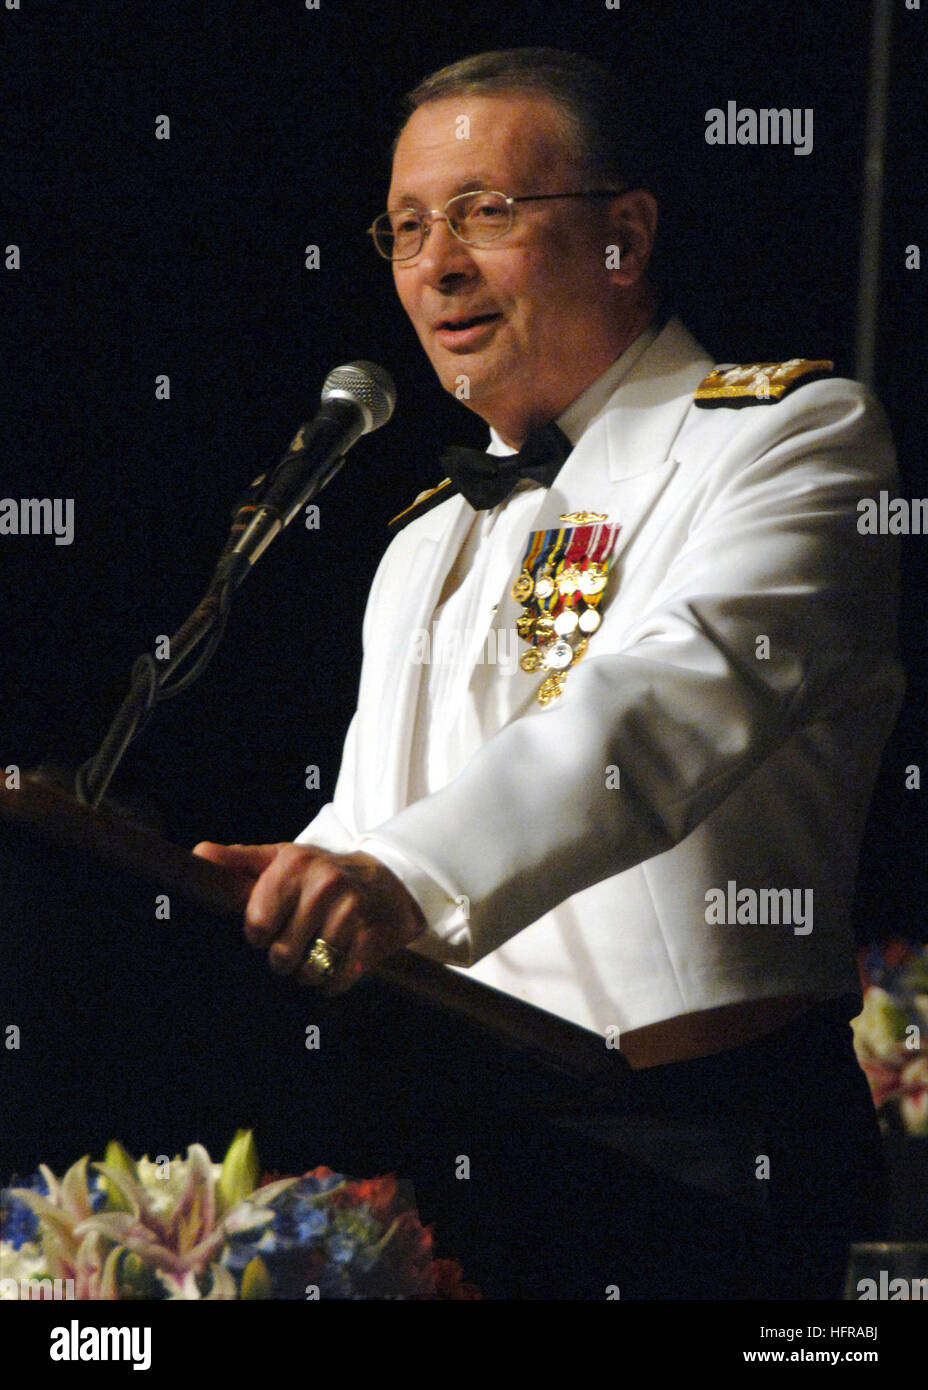 061017-N-1132M-139 Gulfport, Miss. (Oct. 17, 2006) - Vice chairman of the Joint Chiefs of Staff, Adm. Edmund P. Giambastiani Jr., addresses guest at the Mississippi Gulf Coast's 28th annual Salute to the Military. The Salute to the Military, sponsored by the Mississippi Gulf Coast Chamber of Commerce, recognizes the significant contributions area military installations and personnel make to the Gulf Coast community. U.S. Navy photo by Mass Communication Specialist 1st Class Sean Mulligan (RELEASED) US Navy 061017-N-1132M-139 Vice chairman of the Joint Chiefs of Staff, Adm. Edmund P. Giambastia Stock Photo